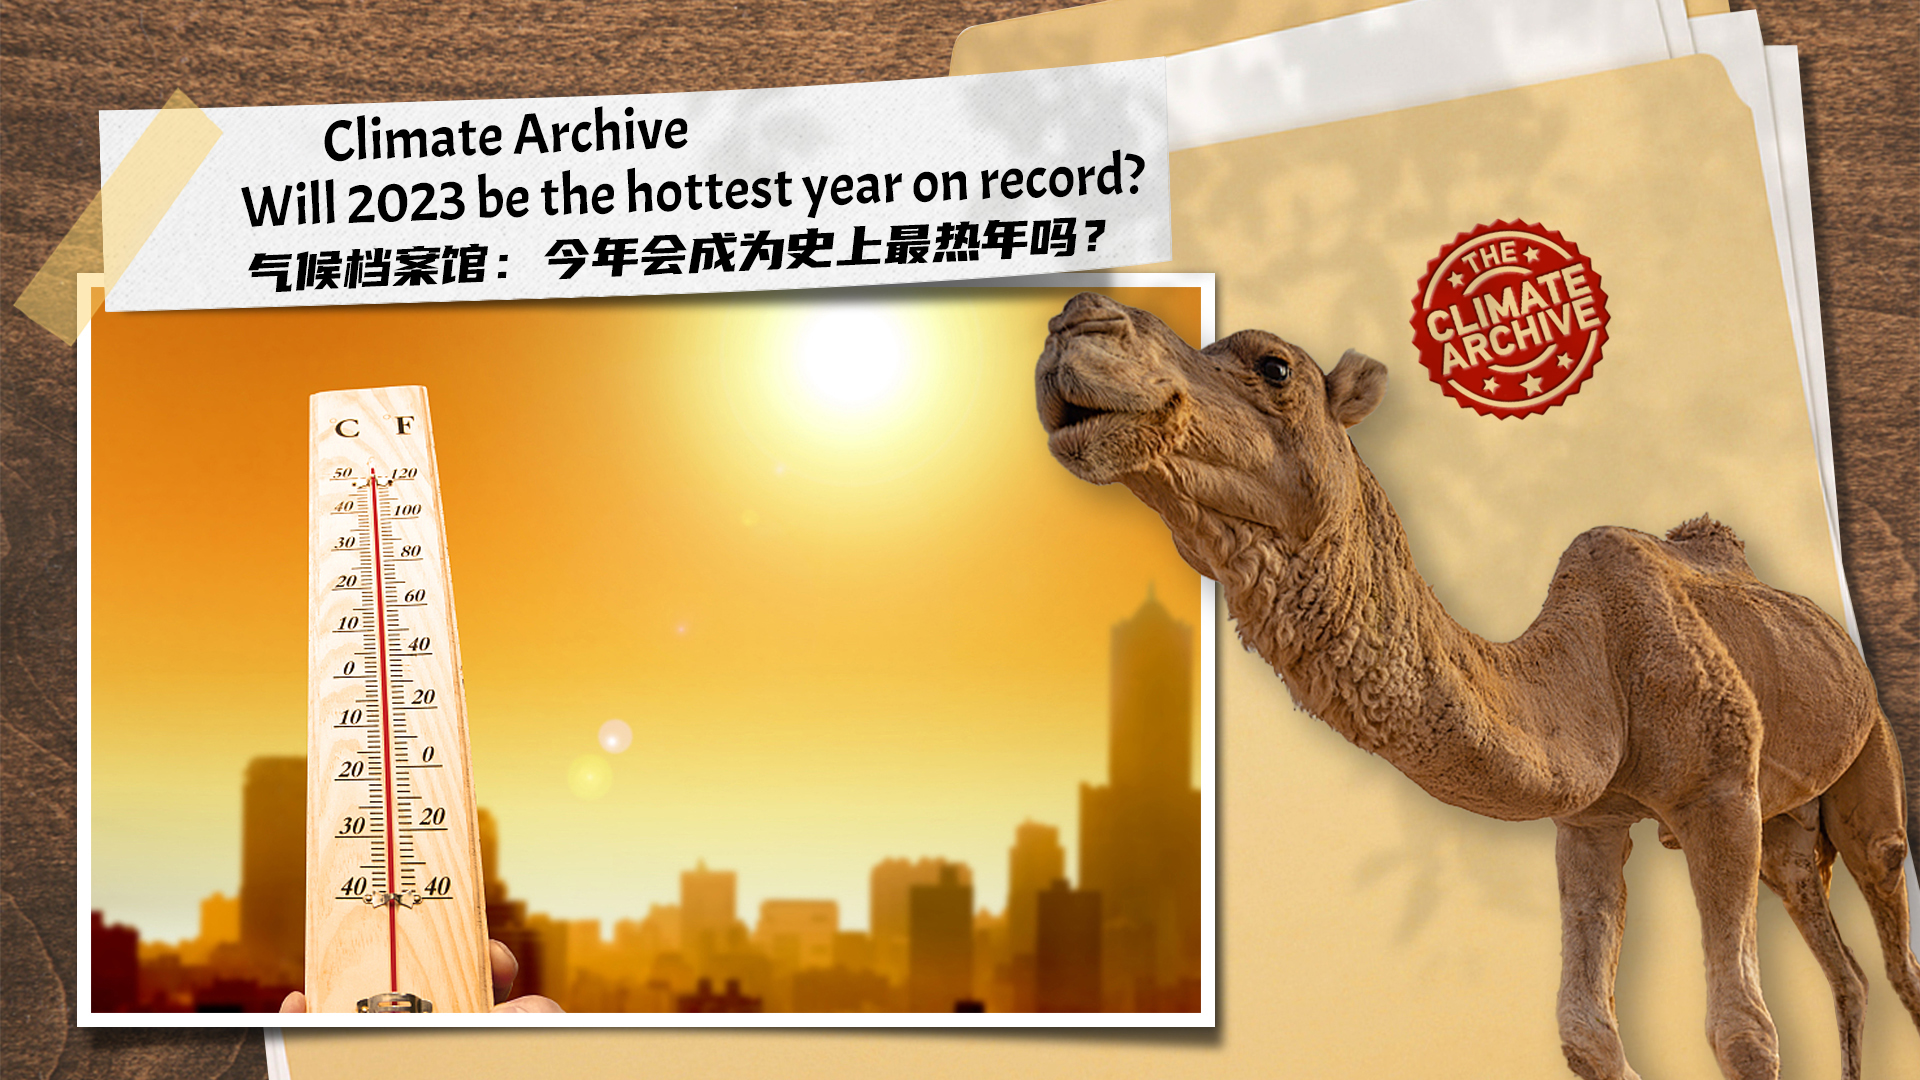 Climate Archive: Will 2023 be the hottest year on record?